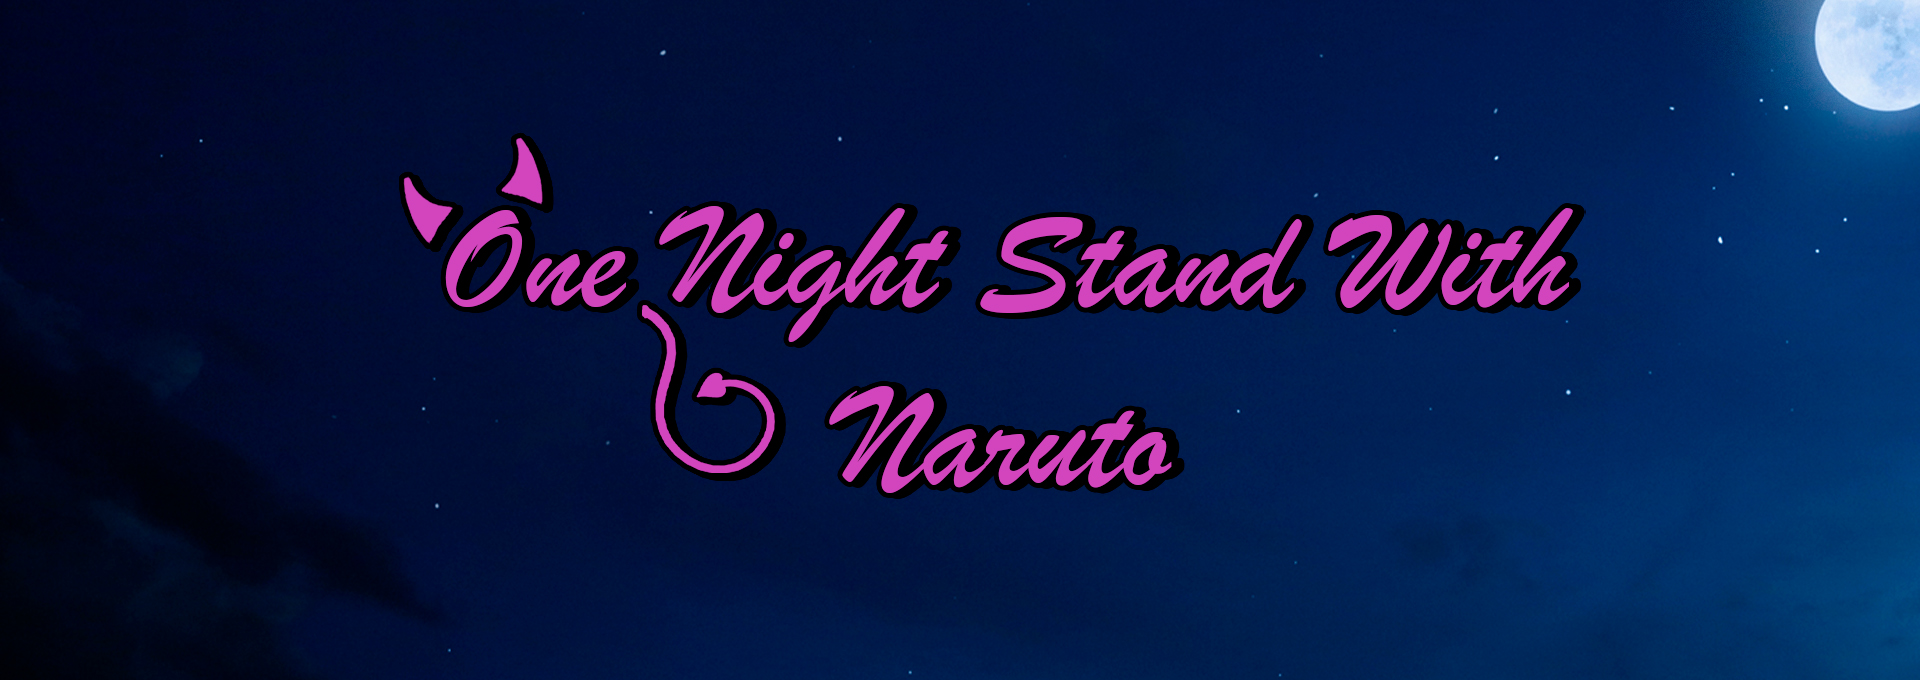 One Night Stand With Naruto